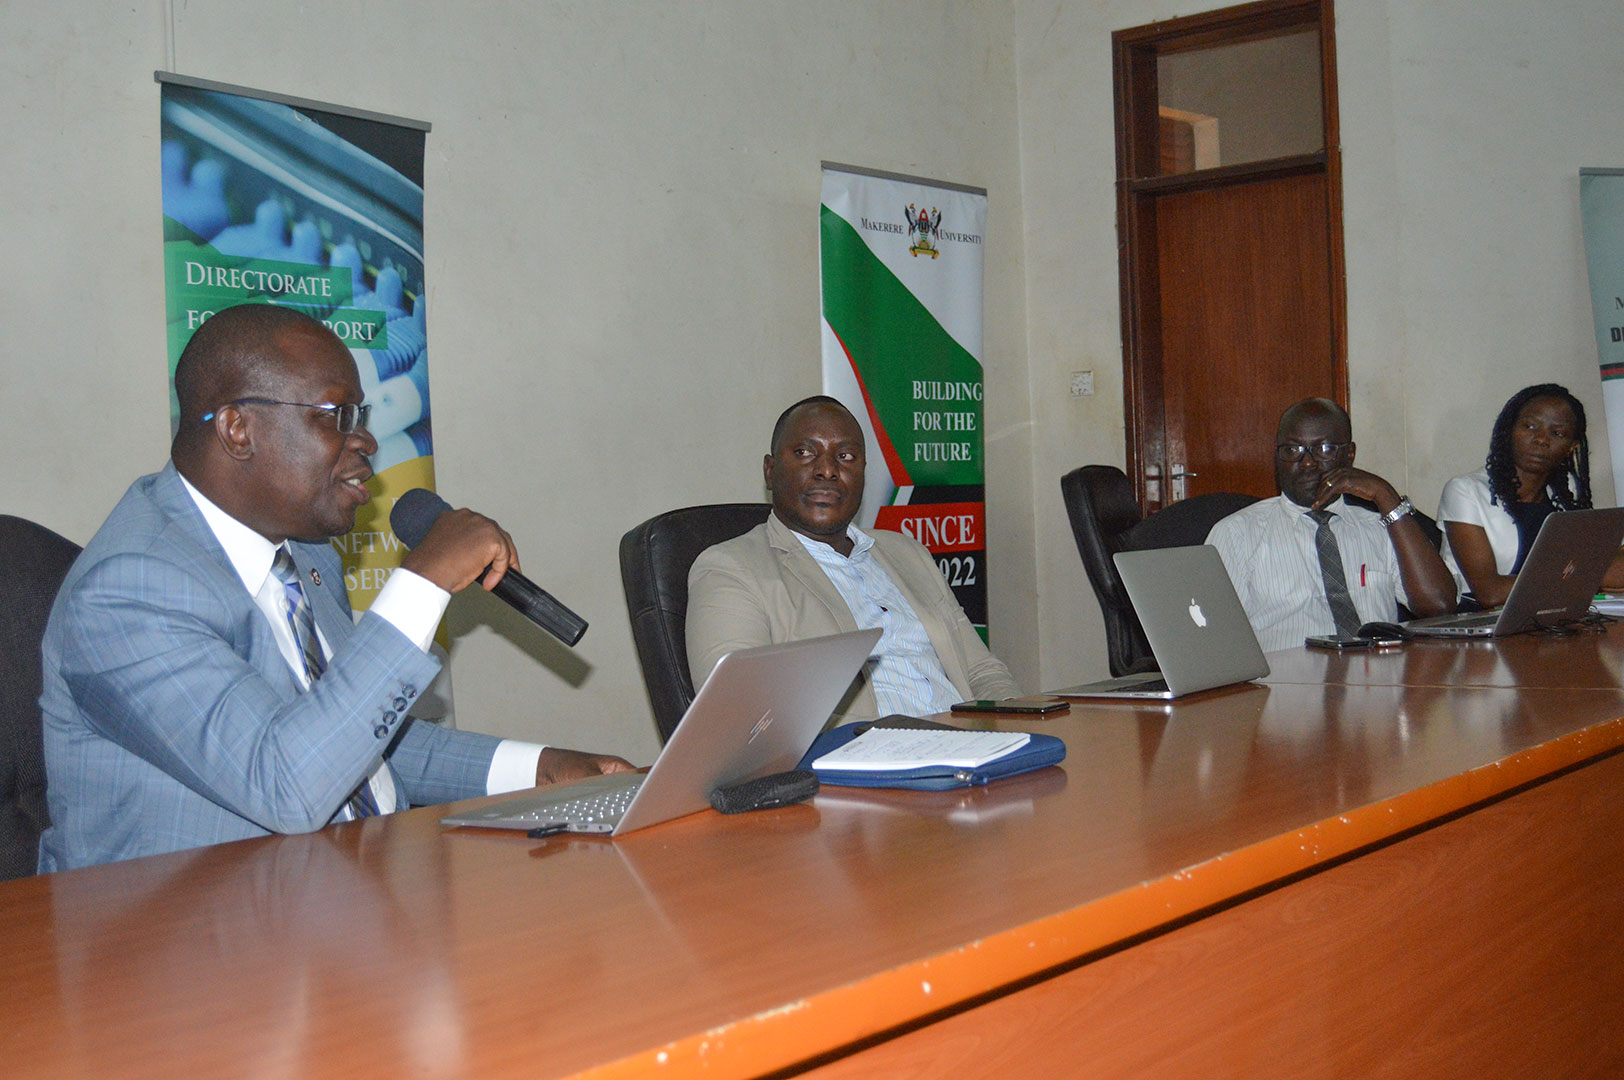 The PPRO. Rita Namisango (Right) , Prof. Paul Birevu Muyinda (2nd from Right) , and the Director DICTS-Mr. Samuel Paul Mugabi (3rd from Right) listens as Mr. Hussein Isingoma responds to a question during the Social Media Workshop on 13th February 2020, Conference Hall, CEDAT, Makerere University, Kampala Uganda.